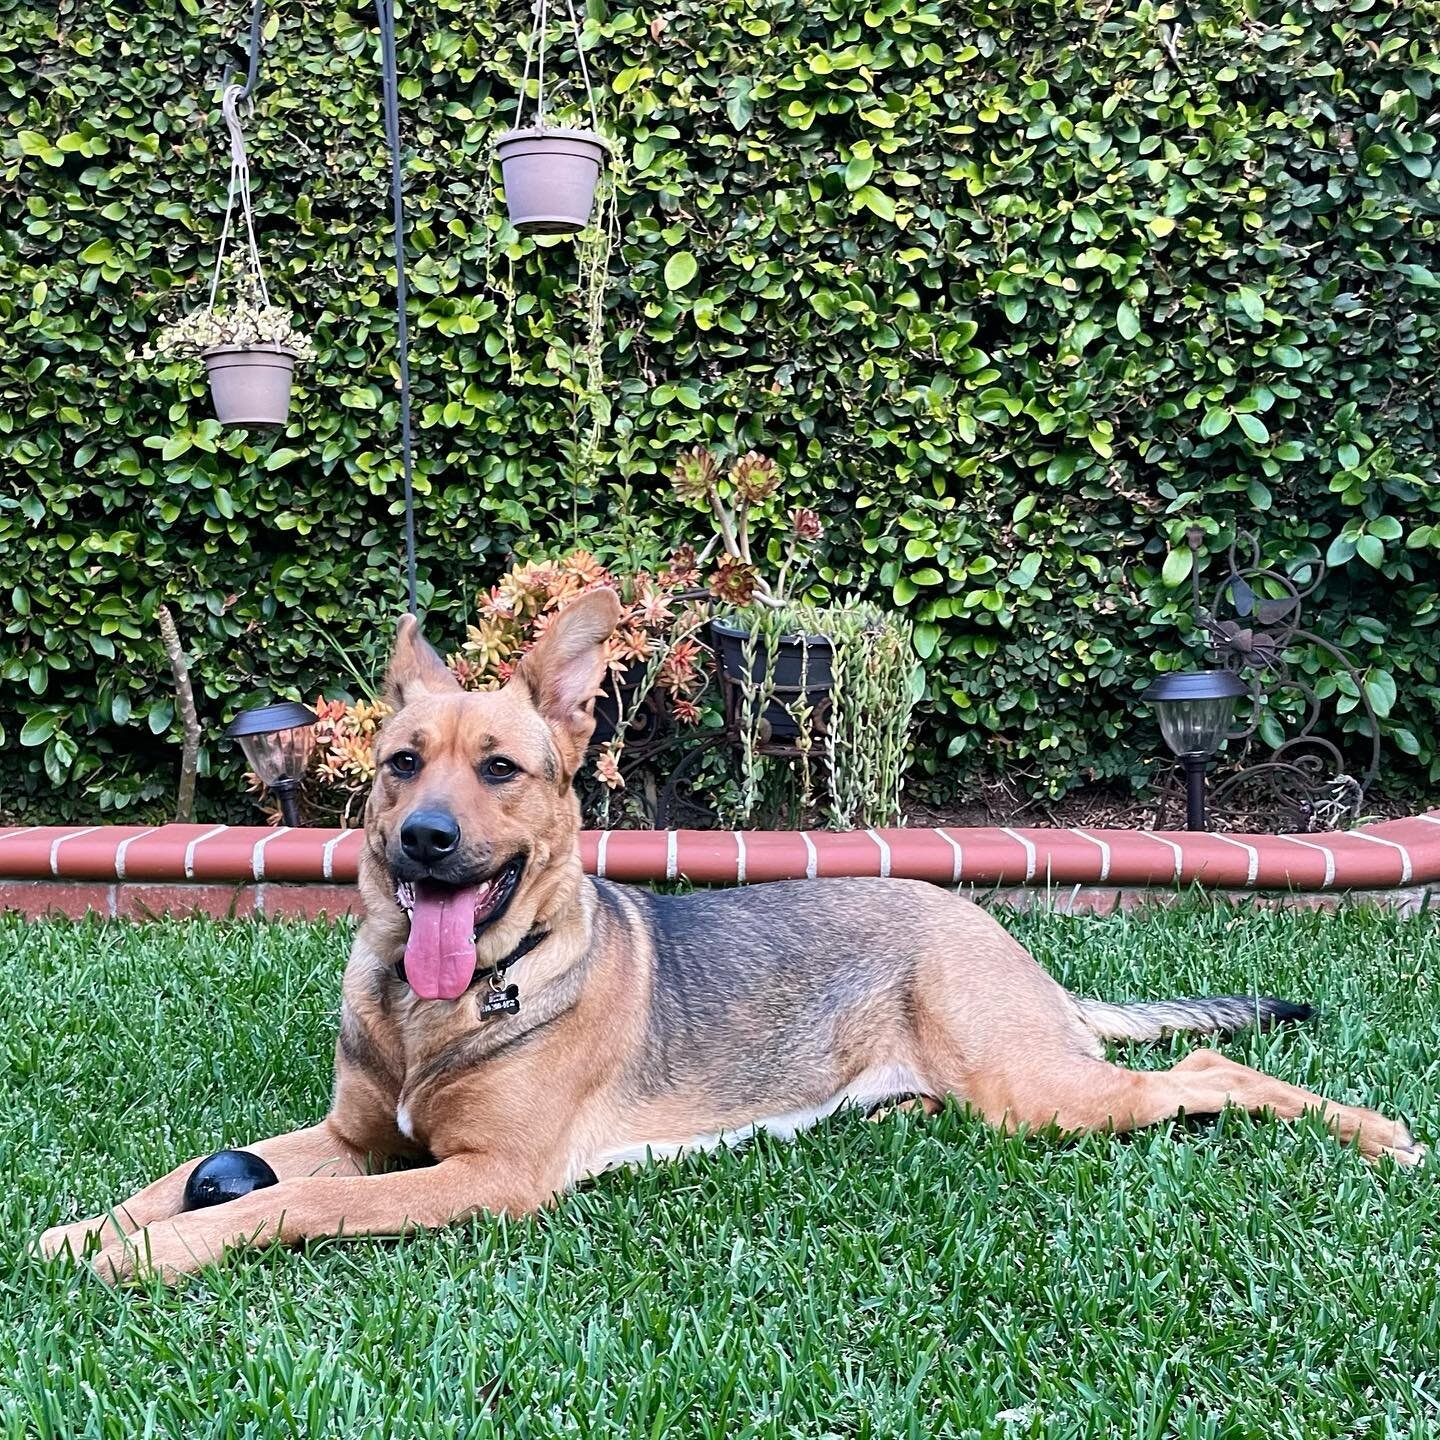 Smiling for the camera 📸
I&rsquo;m Jessie!
I was found as a stray in LA but I&rsquo;m in good hands now and ready for my forever home!

I love being pet, playing with dogs, and playing fetch! I&rsquo;d say I&rsquo;m a medium energy dog.

I&rsquo;m a